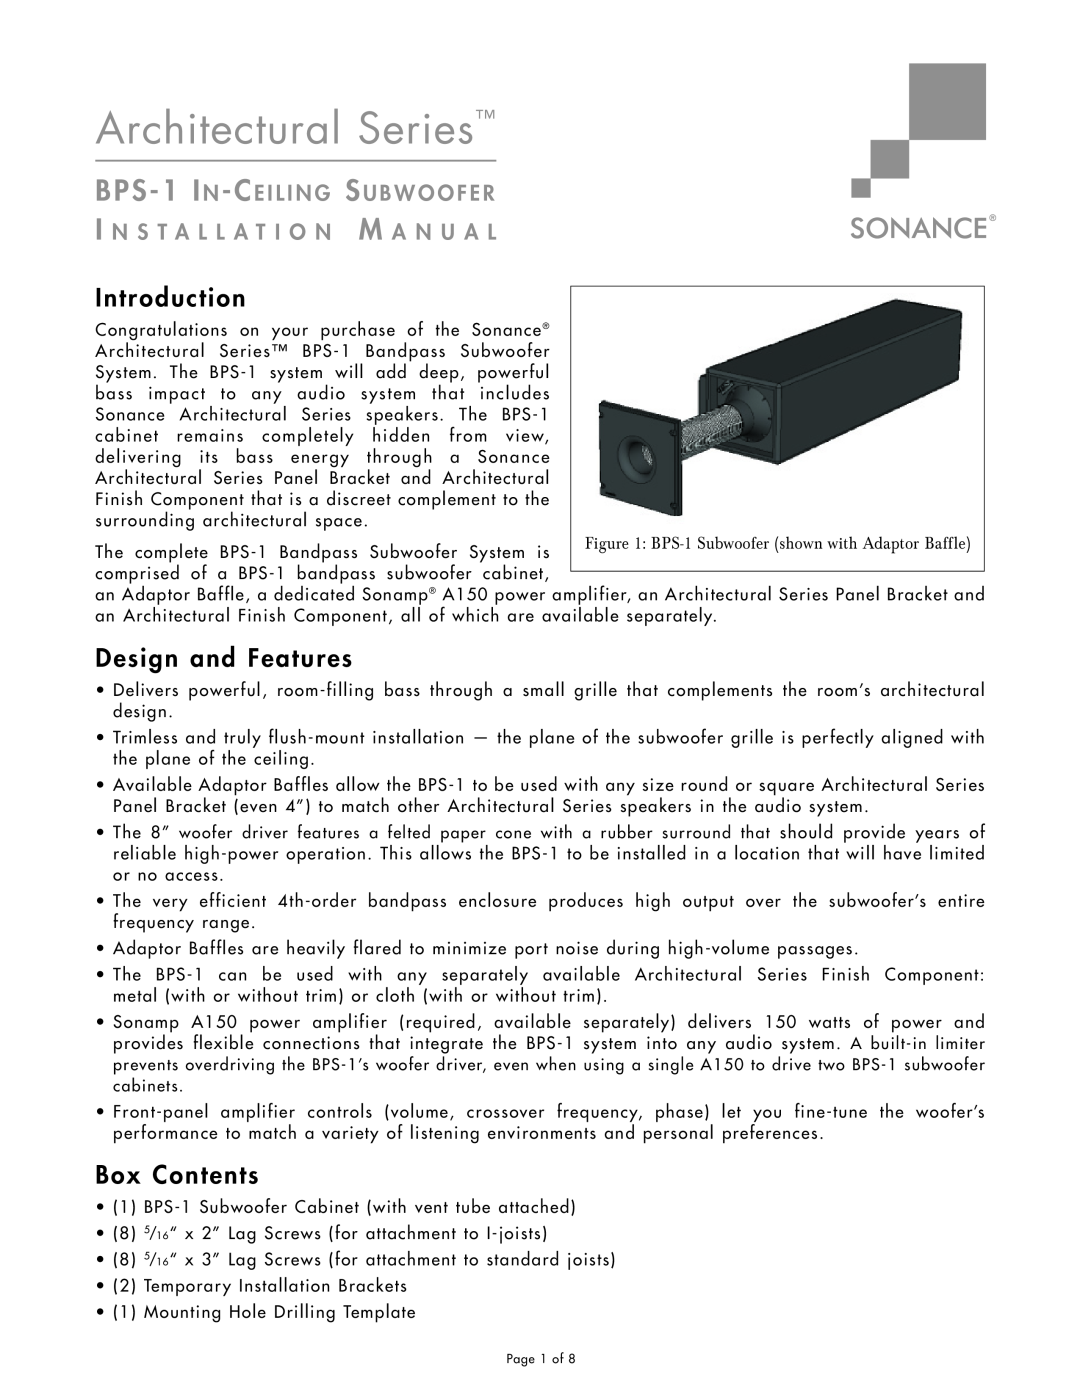 Sonance BPS-1 installation manual Architectural Series, Introduction, Design and Features, Box Contents 